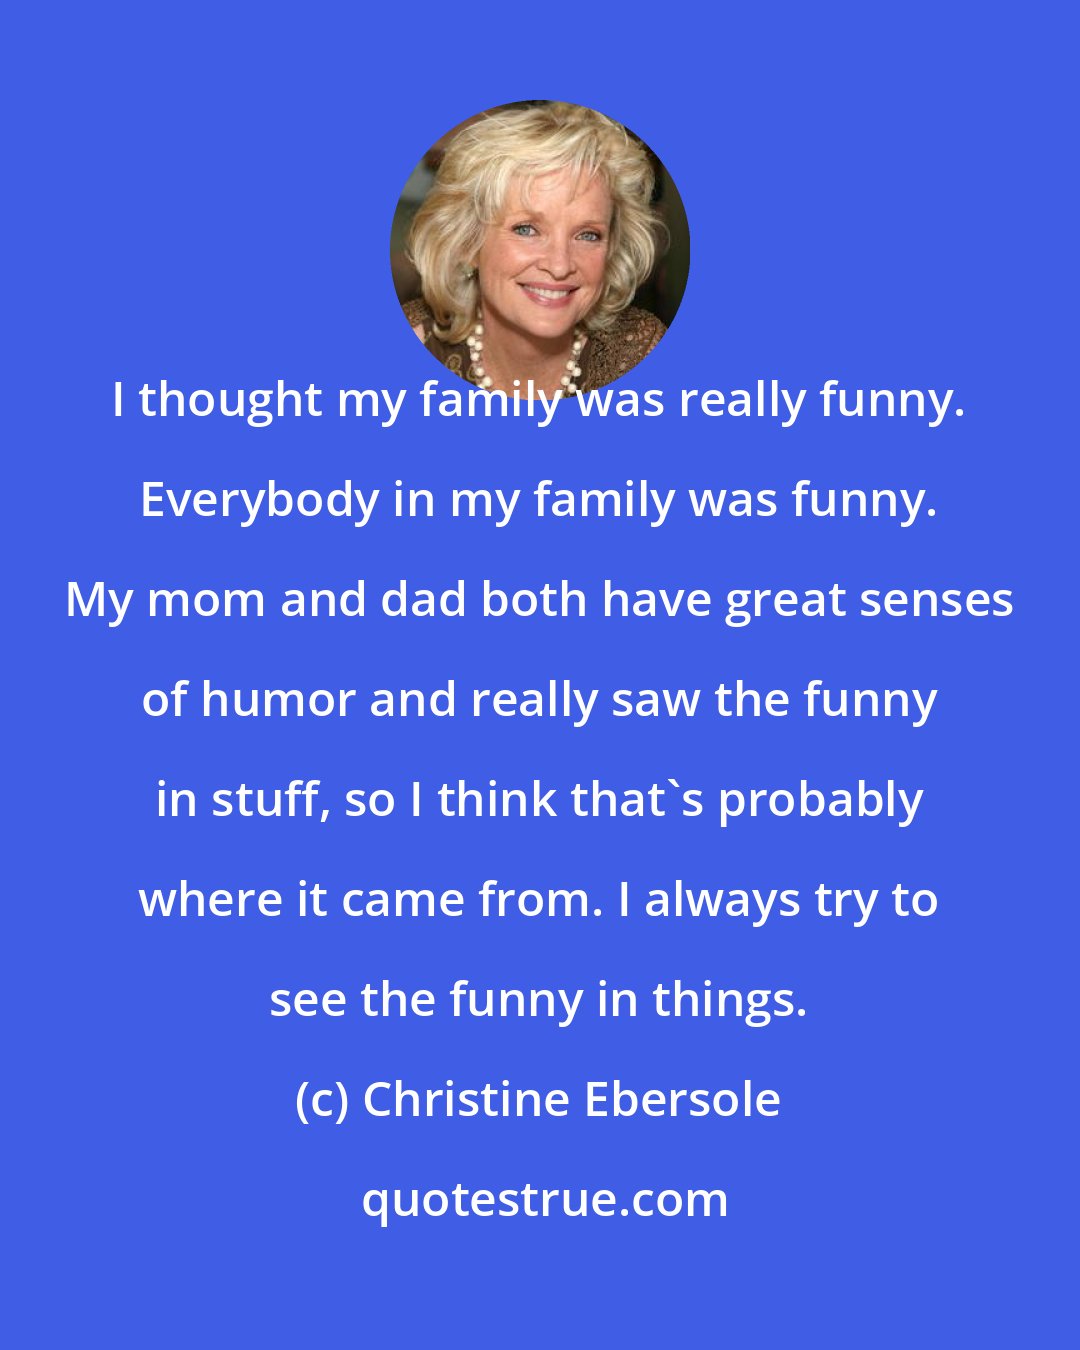 Christine Ebersole: I thought my family was really funny. Everybody in my family was funny. My mom and dad both have great senses of humor and really saw the funny in stuff, so I think that's probably where it came from. I always try to see the funny in things.